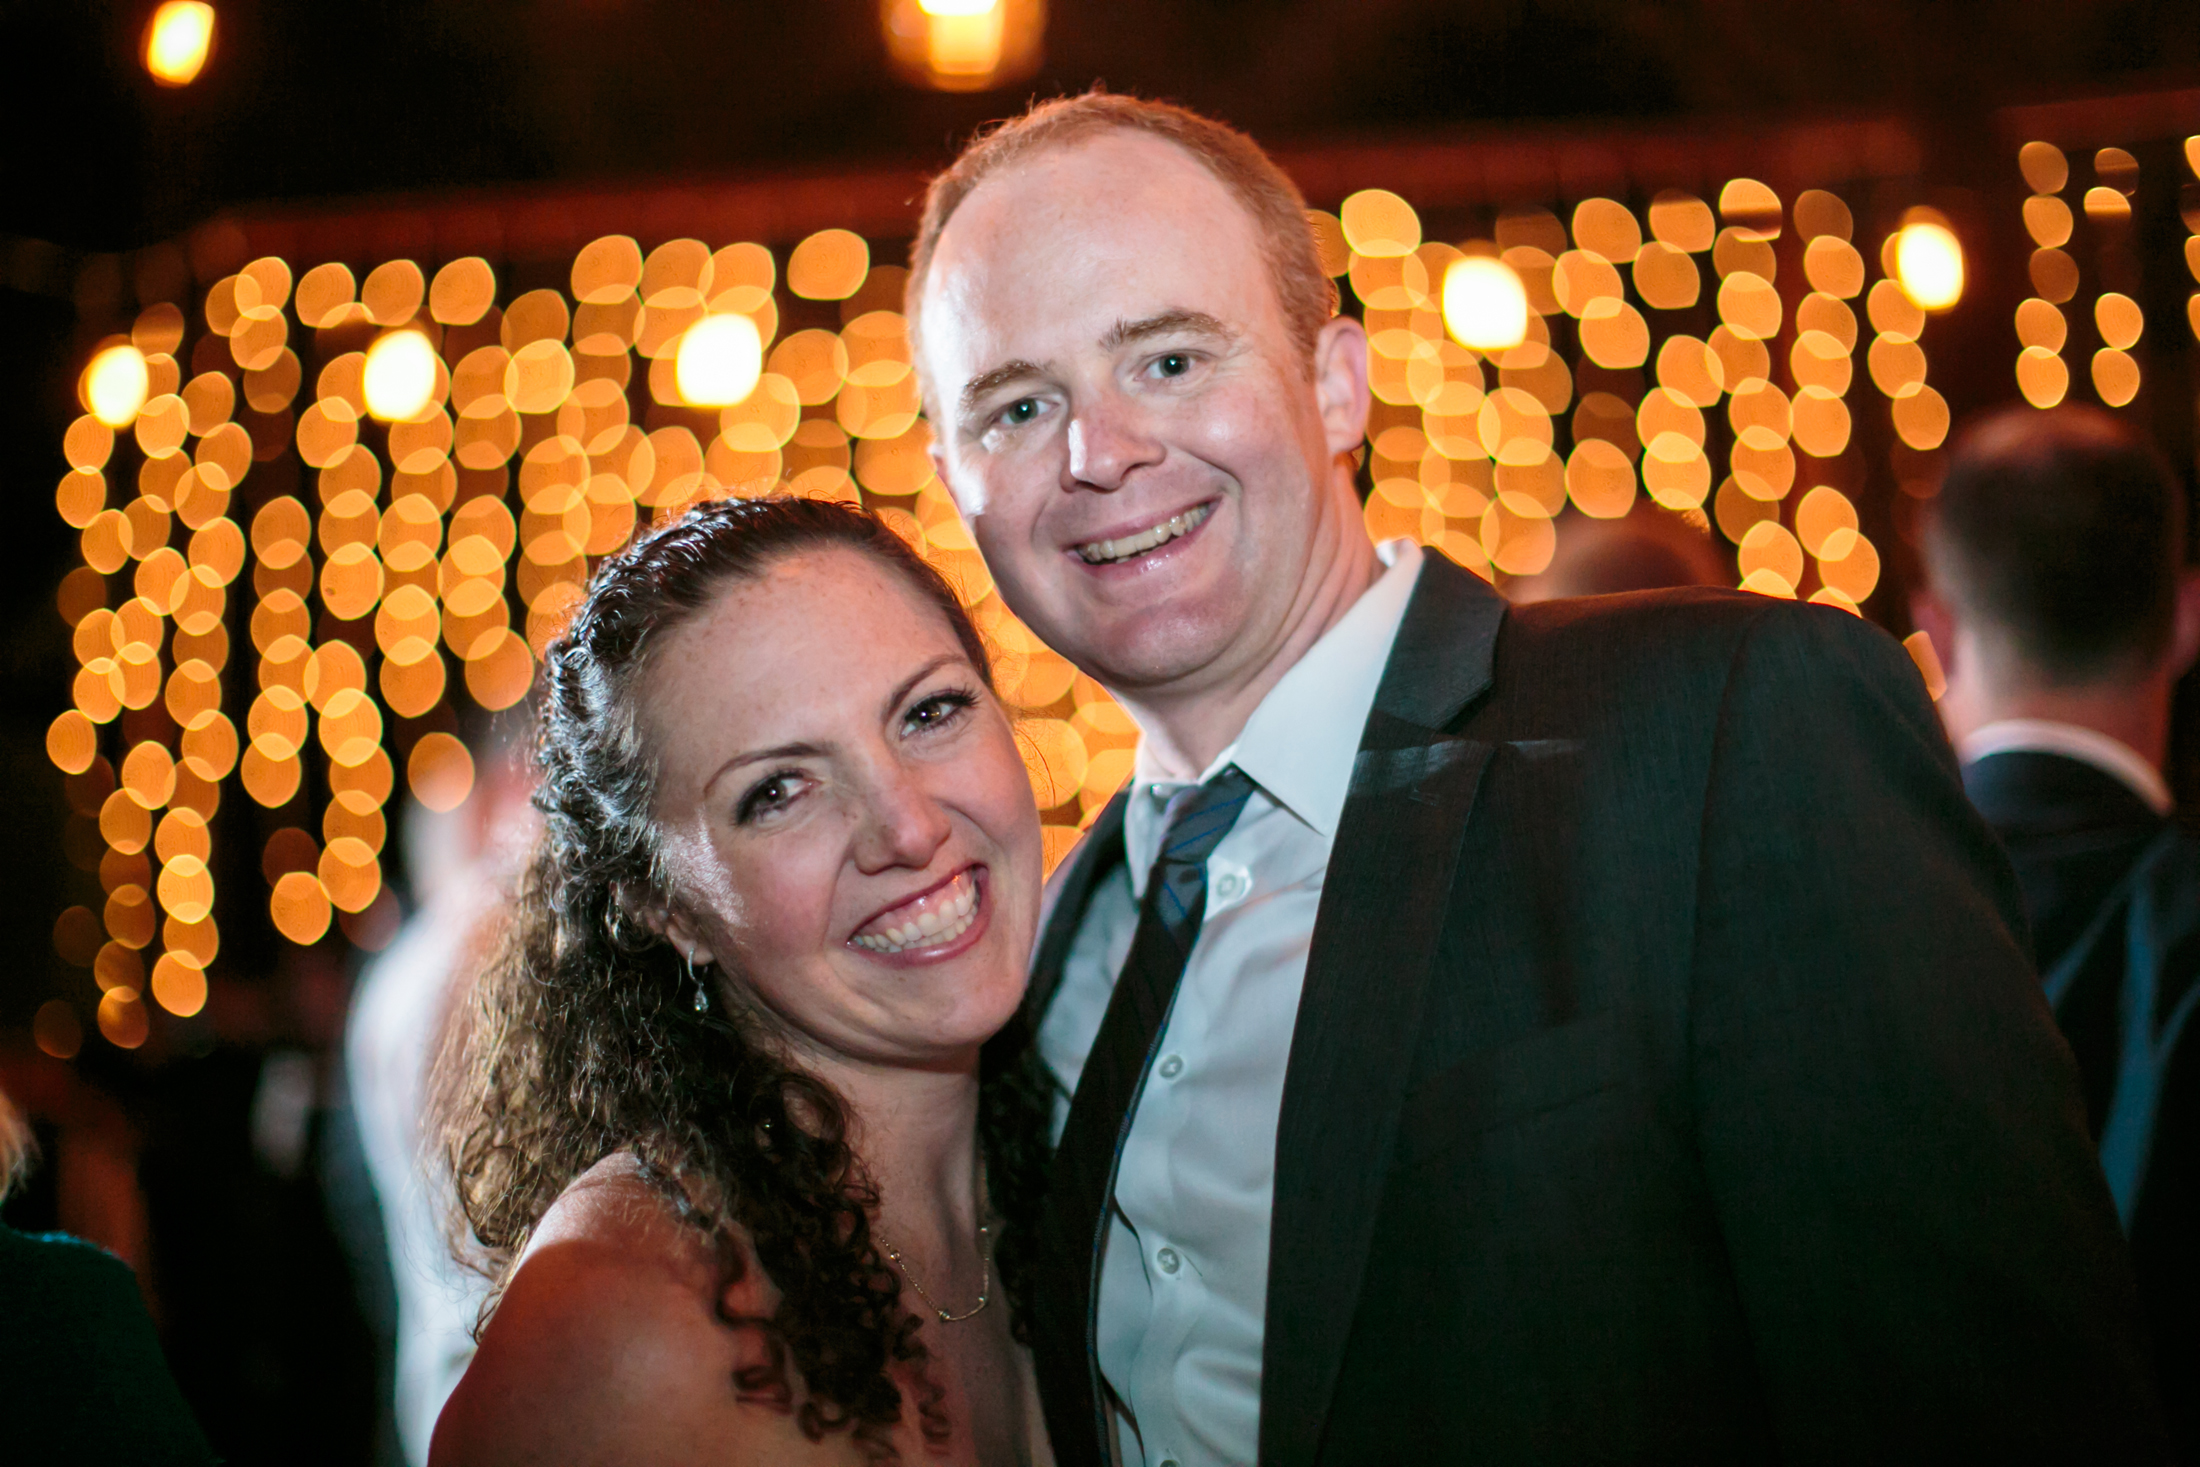 Smiling guests in front of a very sparkly, bokeh background.